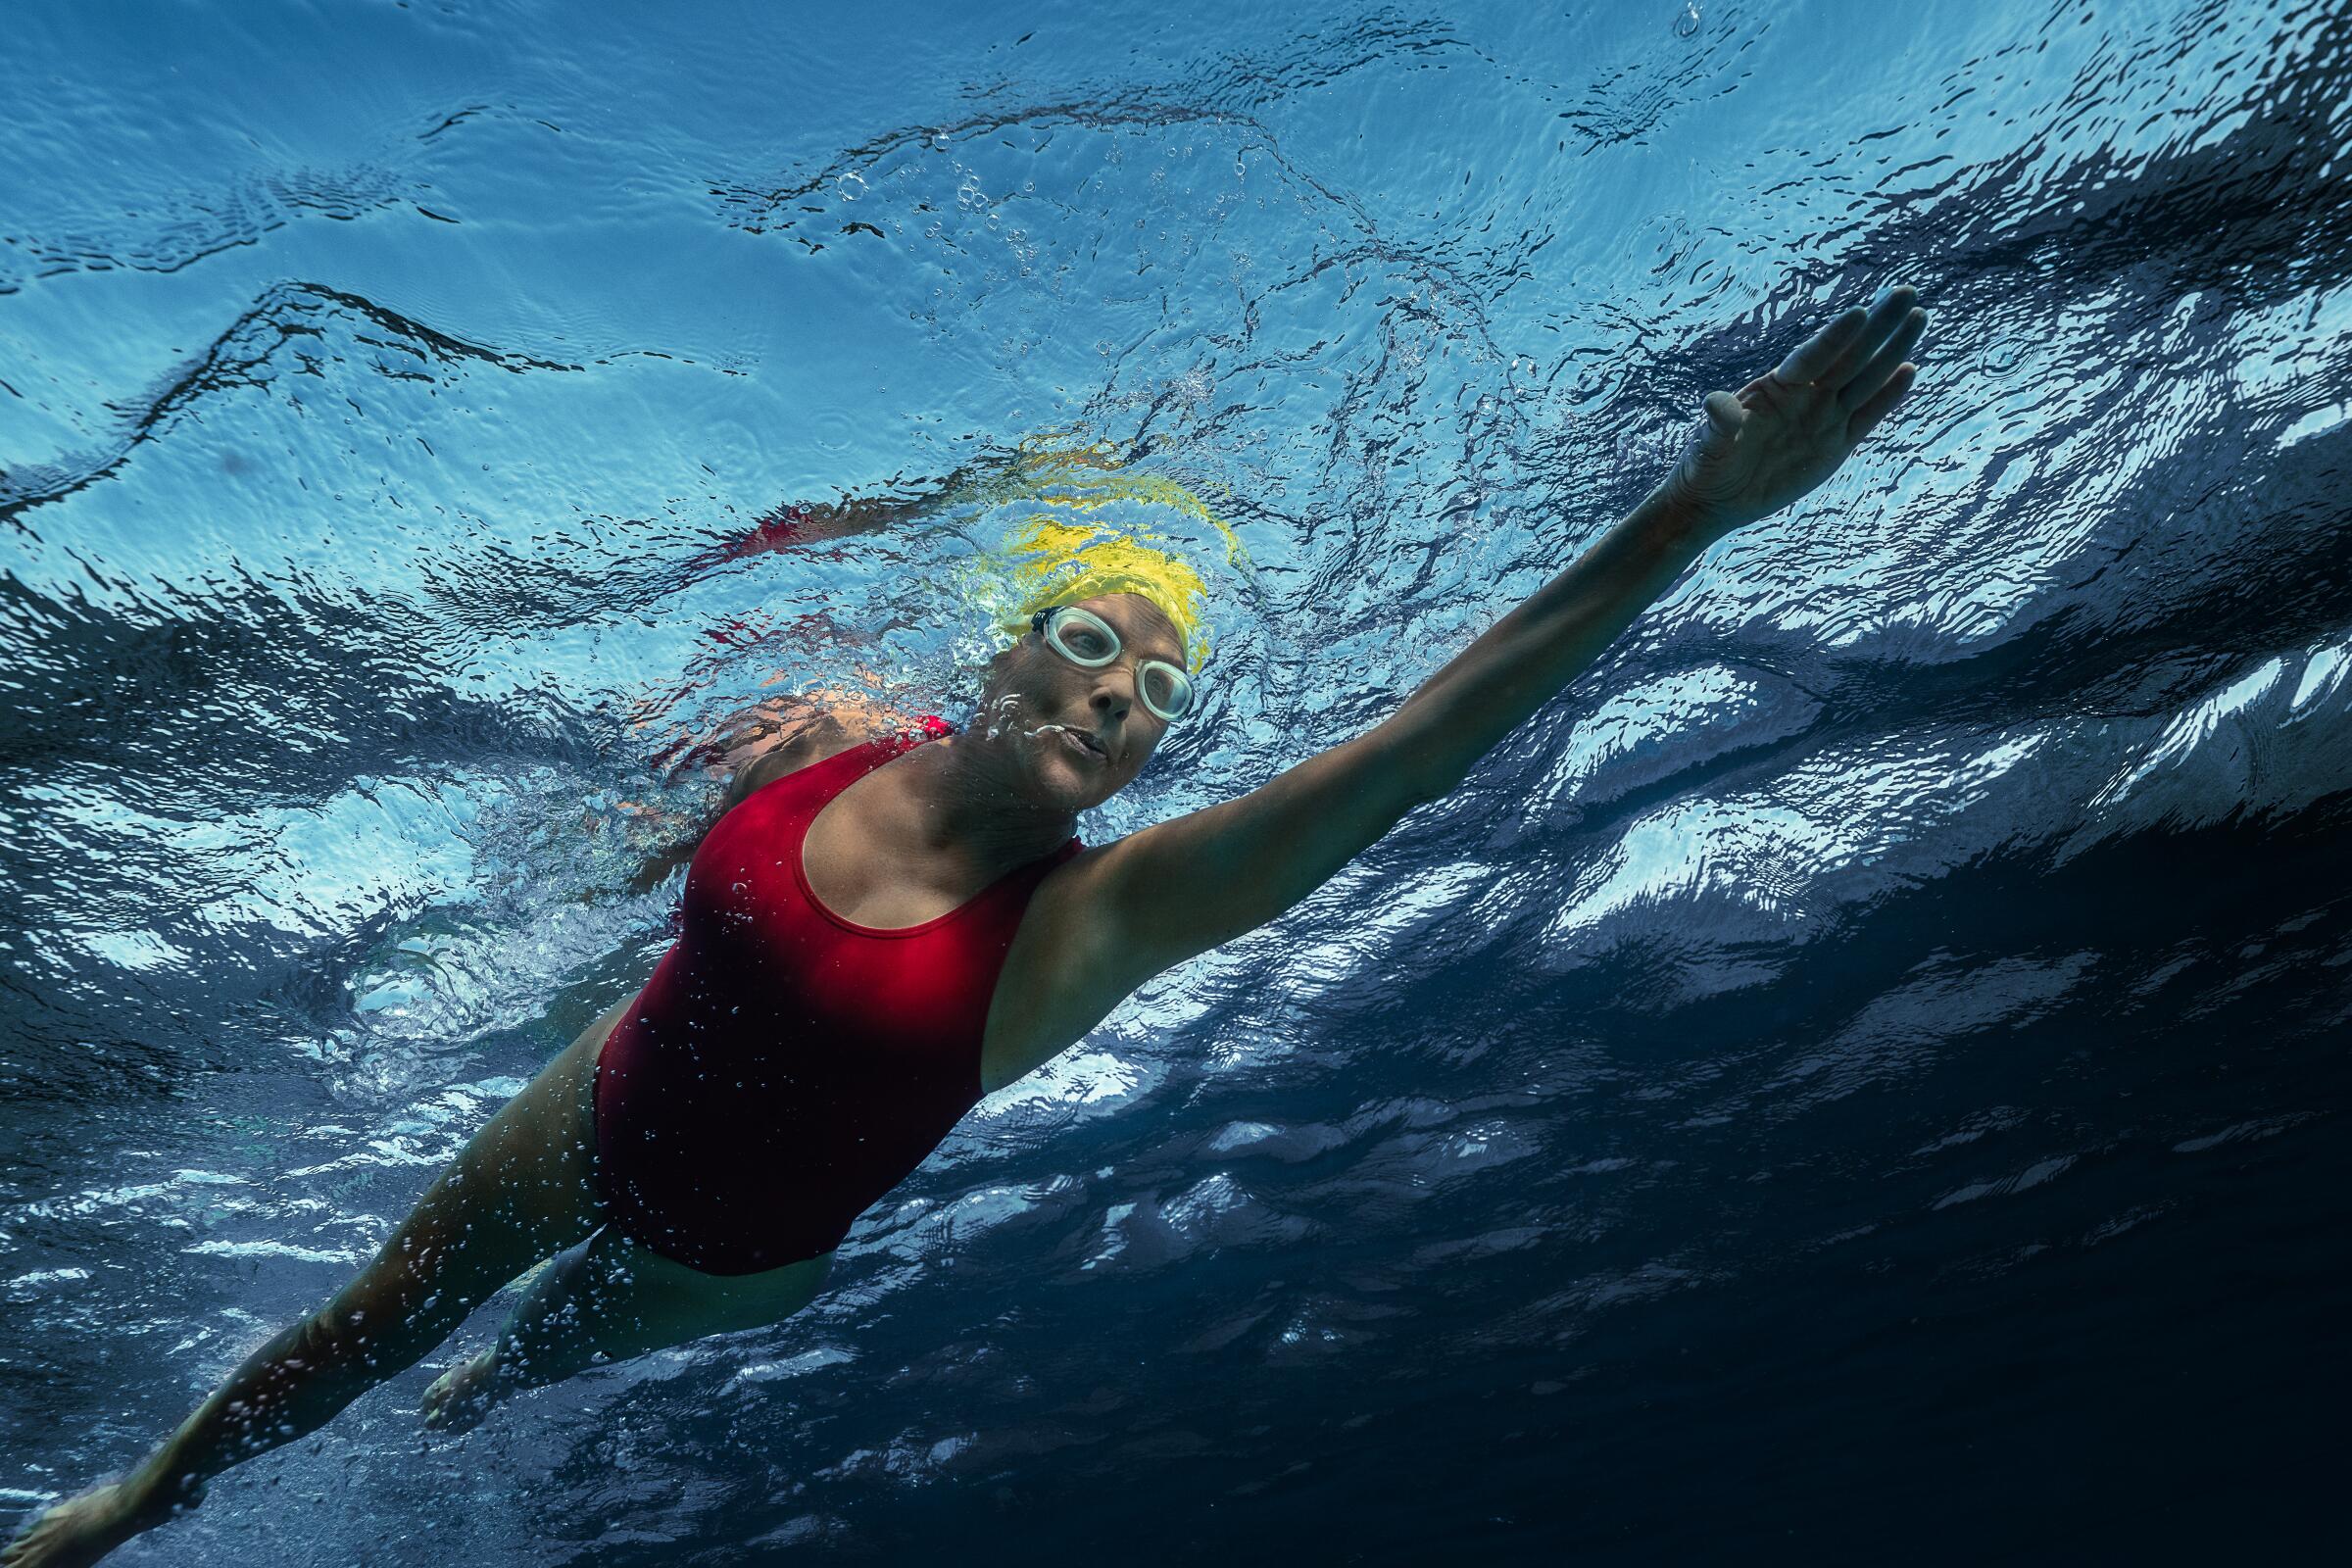 A female swimmer in red bathing suit and yellow cap, seen from underwater